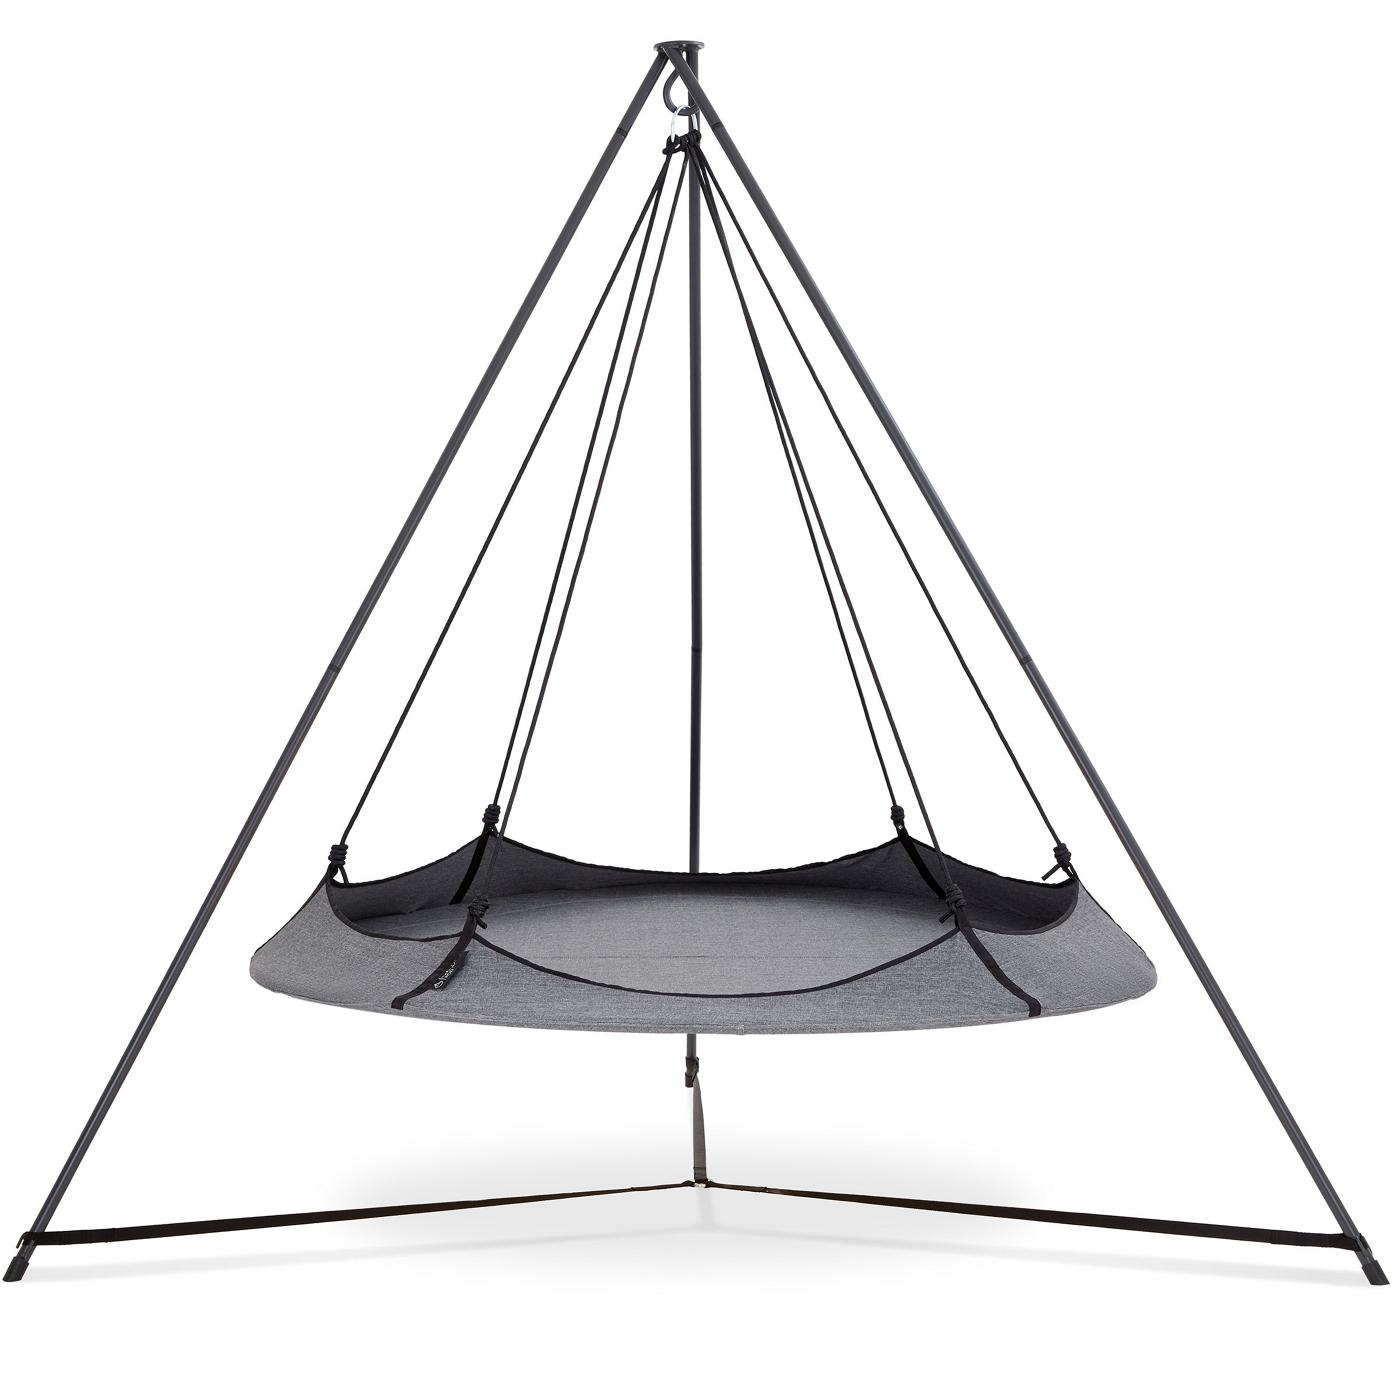 Hangout Pod Grey/Black Circular Family Hammock Bed with Stand; image 1 of 10